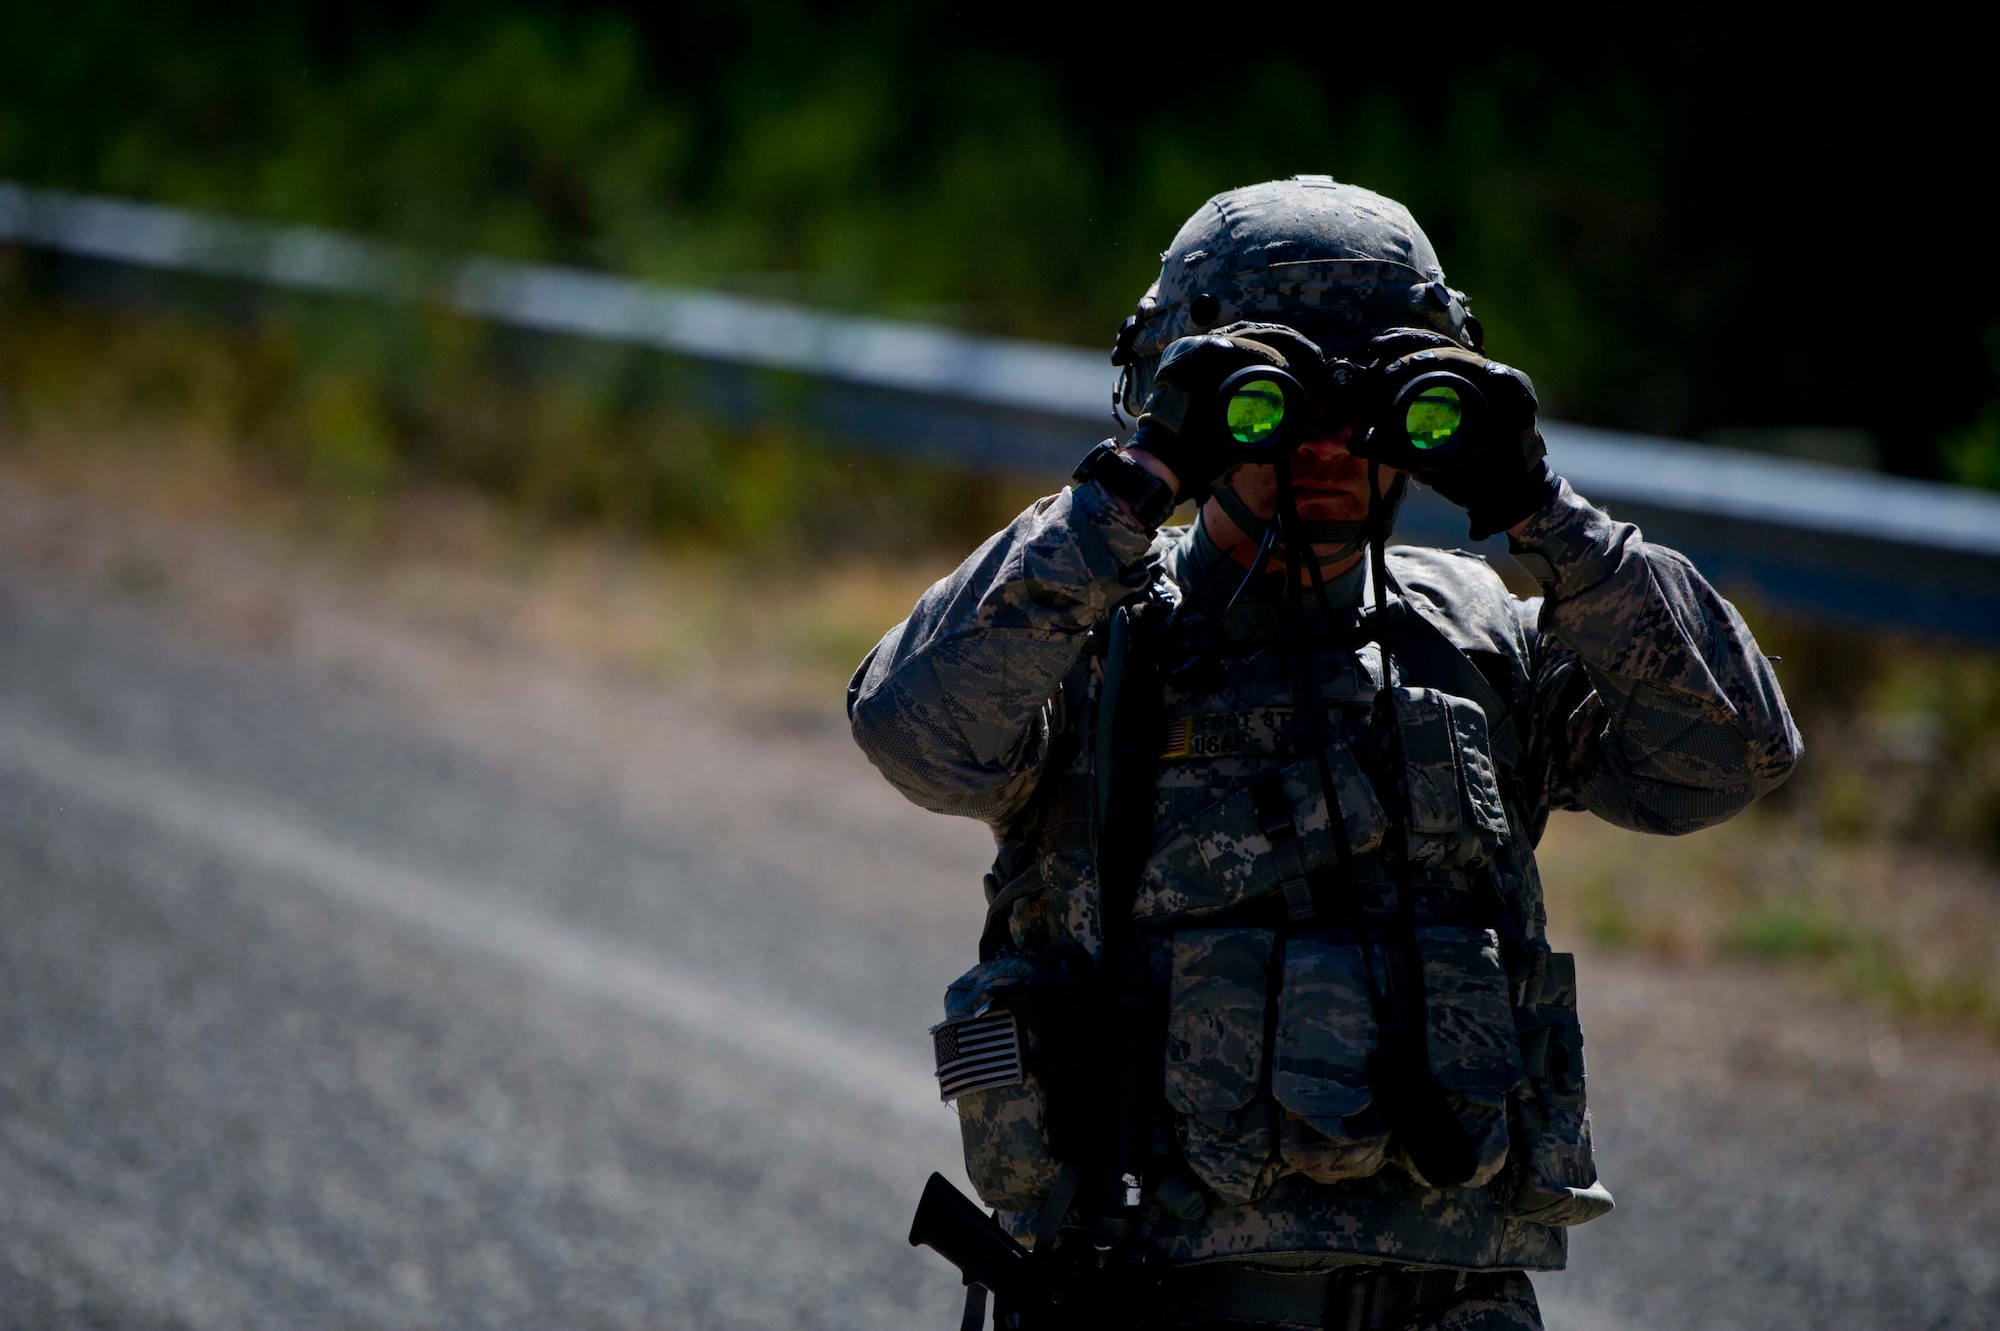 A Citizen Airman from the 446th Security Forces Squadron scans the area as part of a large-scale Field Training Exercise at Joint Base Lewis-McChord September 8 - 11th. The exercise focused on training Citizen Airmen on expeditionary tactics and procedures. (U.S. Air Force Reserve photo by Staff Sgt. Daniel Liddicoet)